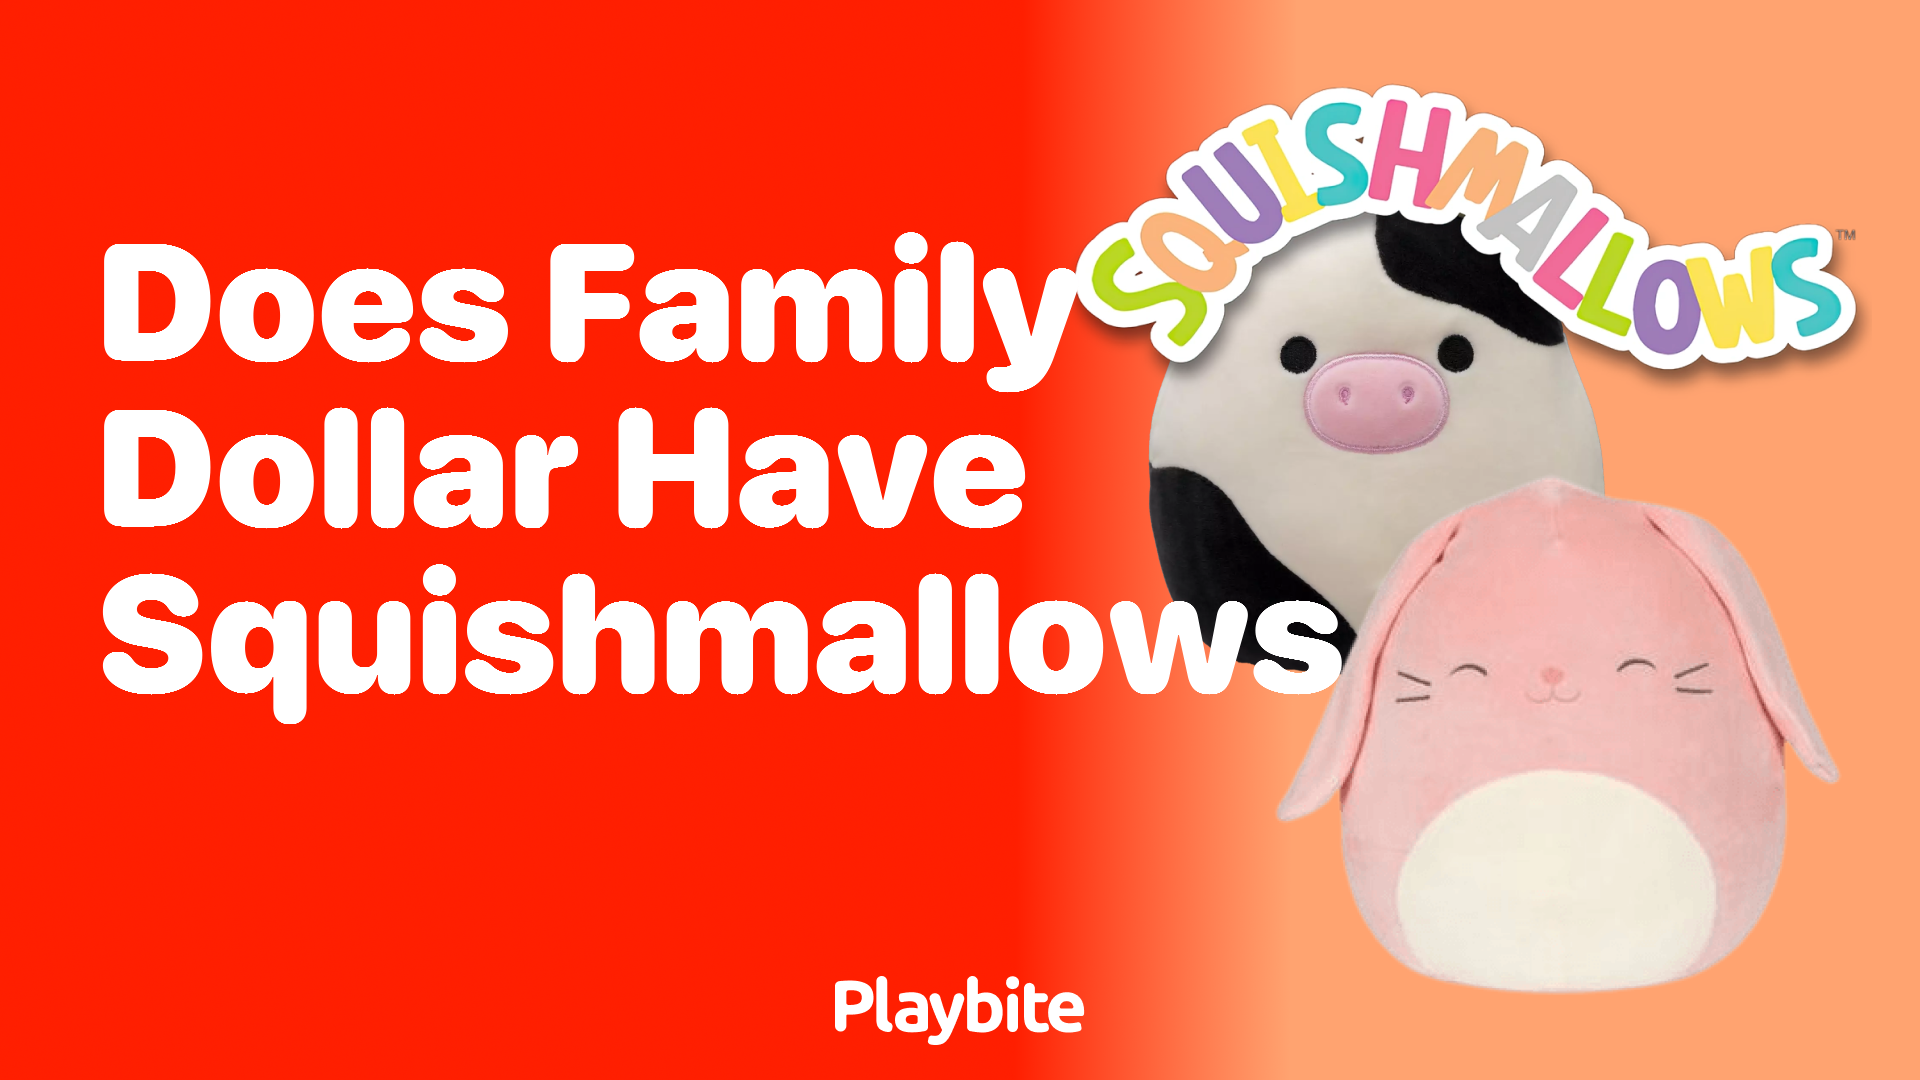 Does Family Dollar Have Squishmallows? Find Out Here!